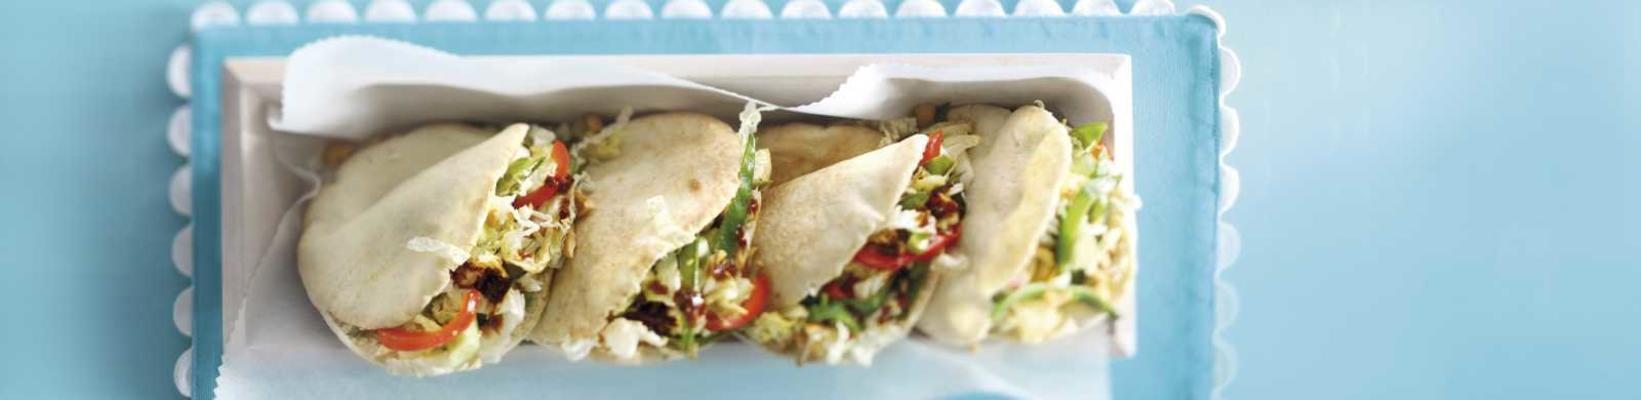 pita bread with vegetables